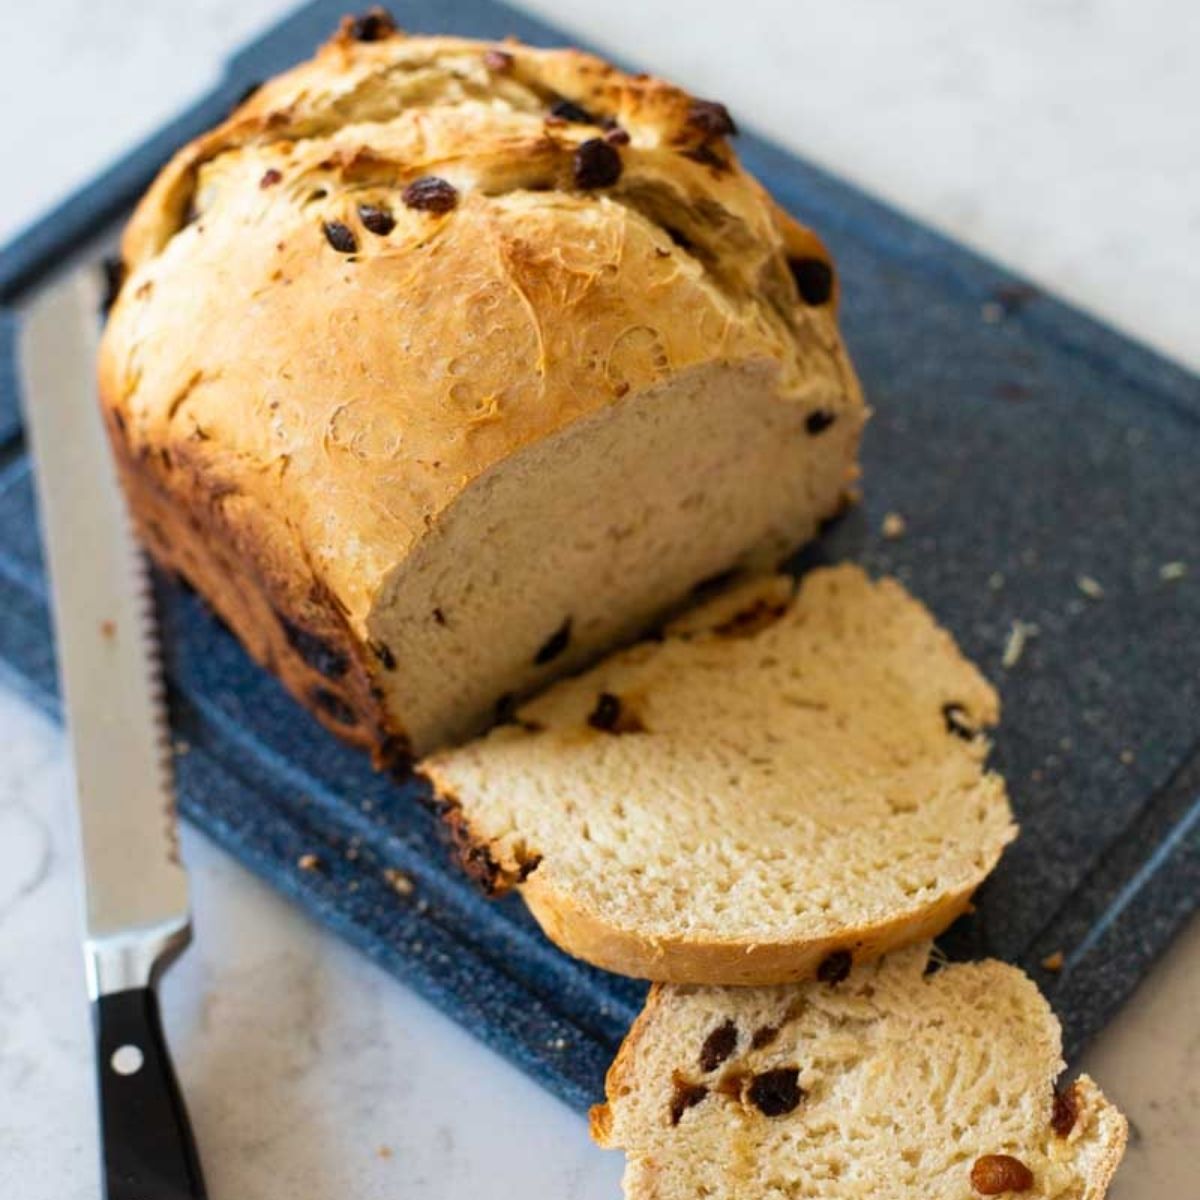 A warm loaf of rum raisin bread is sliced to serve.